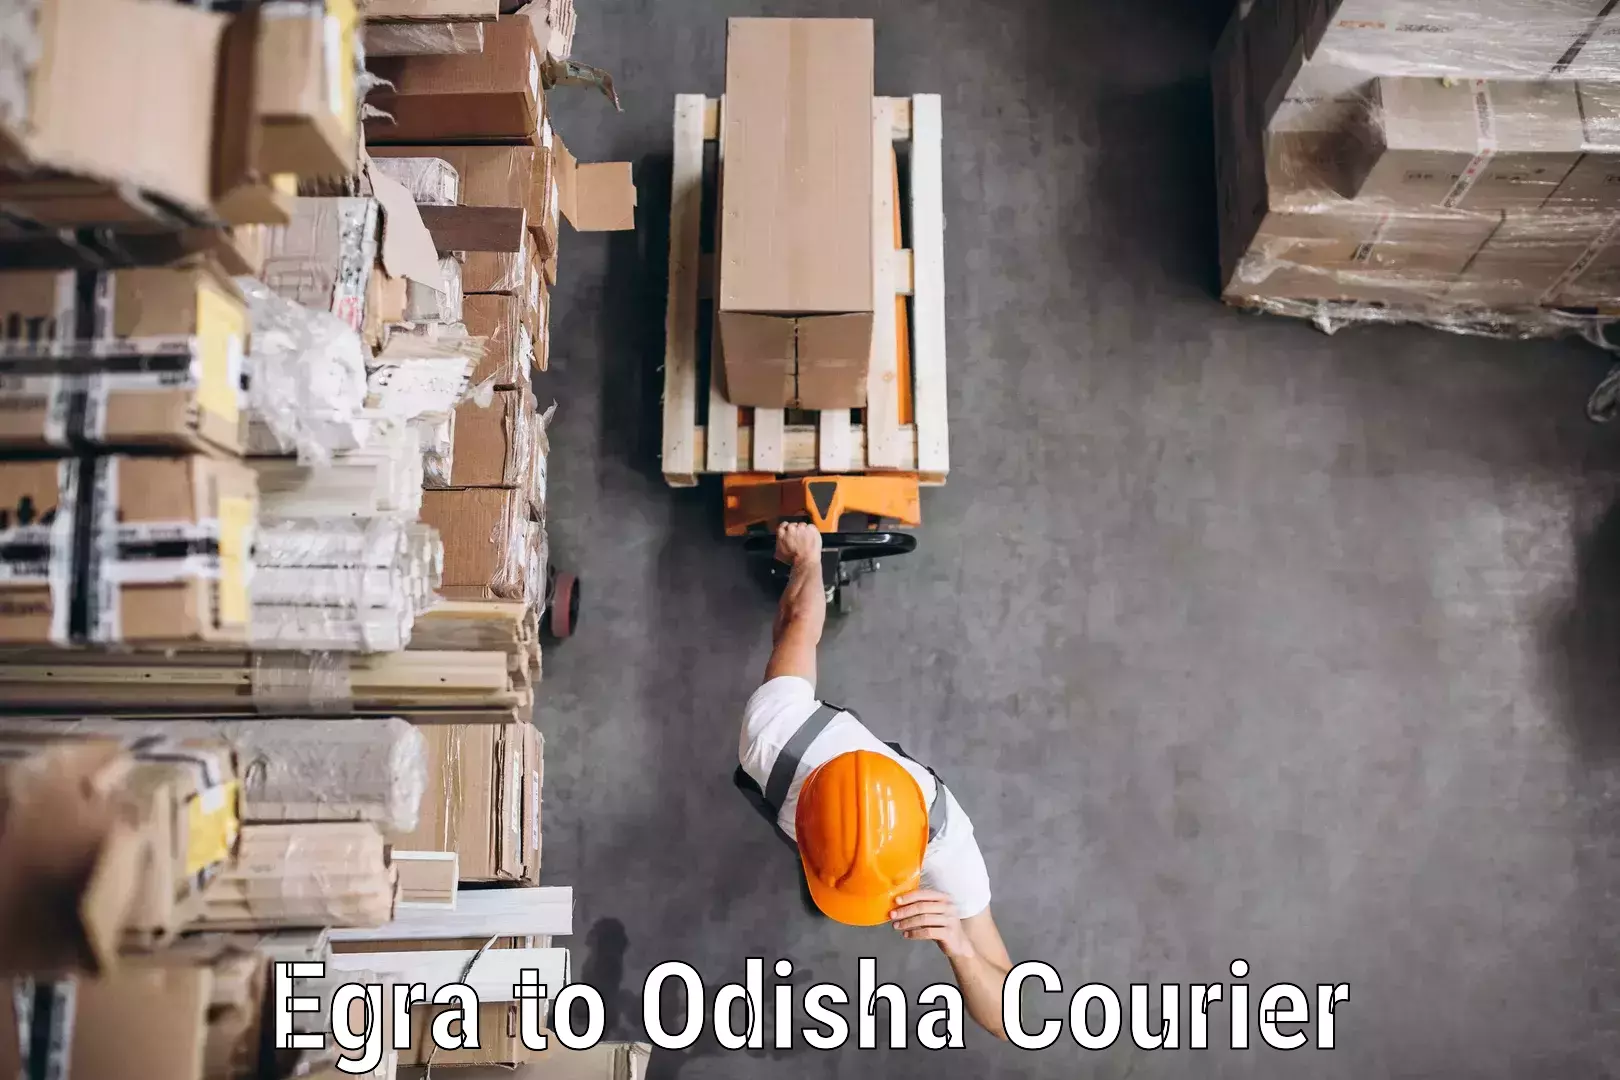 Online package tracking in Egra to Odisha